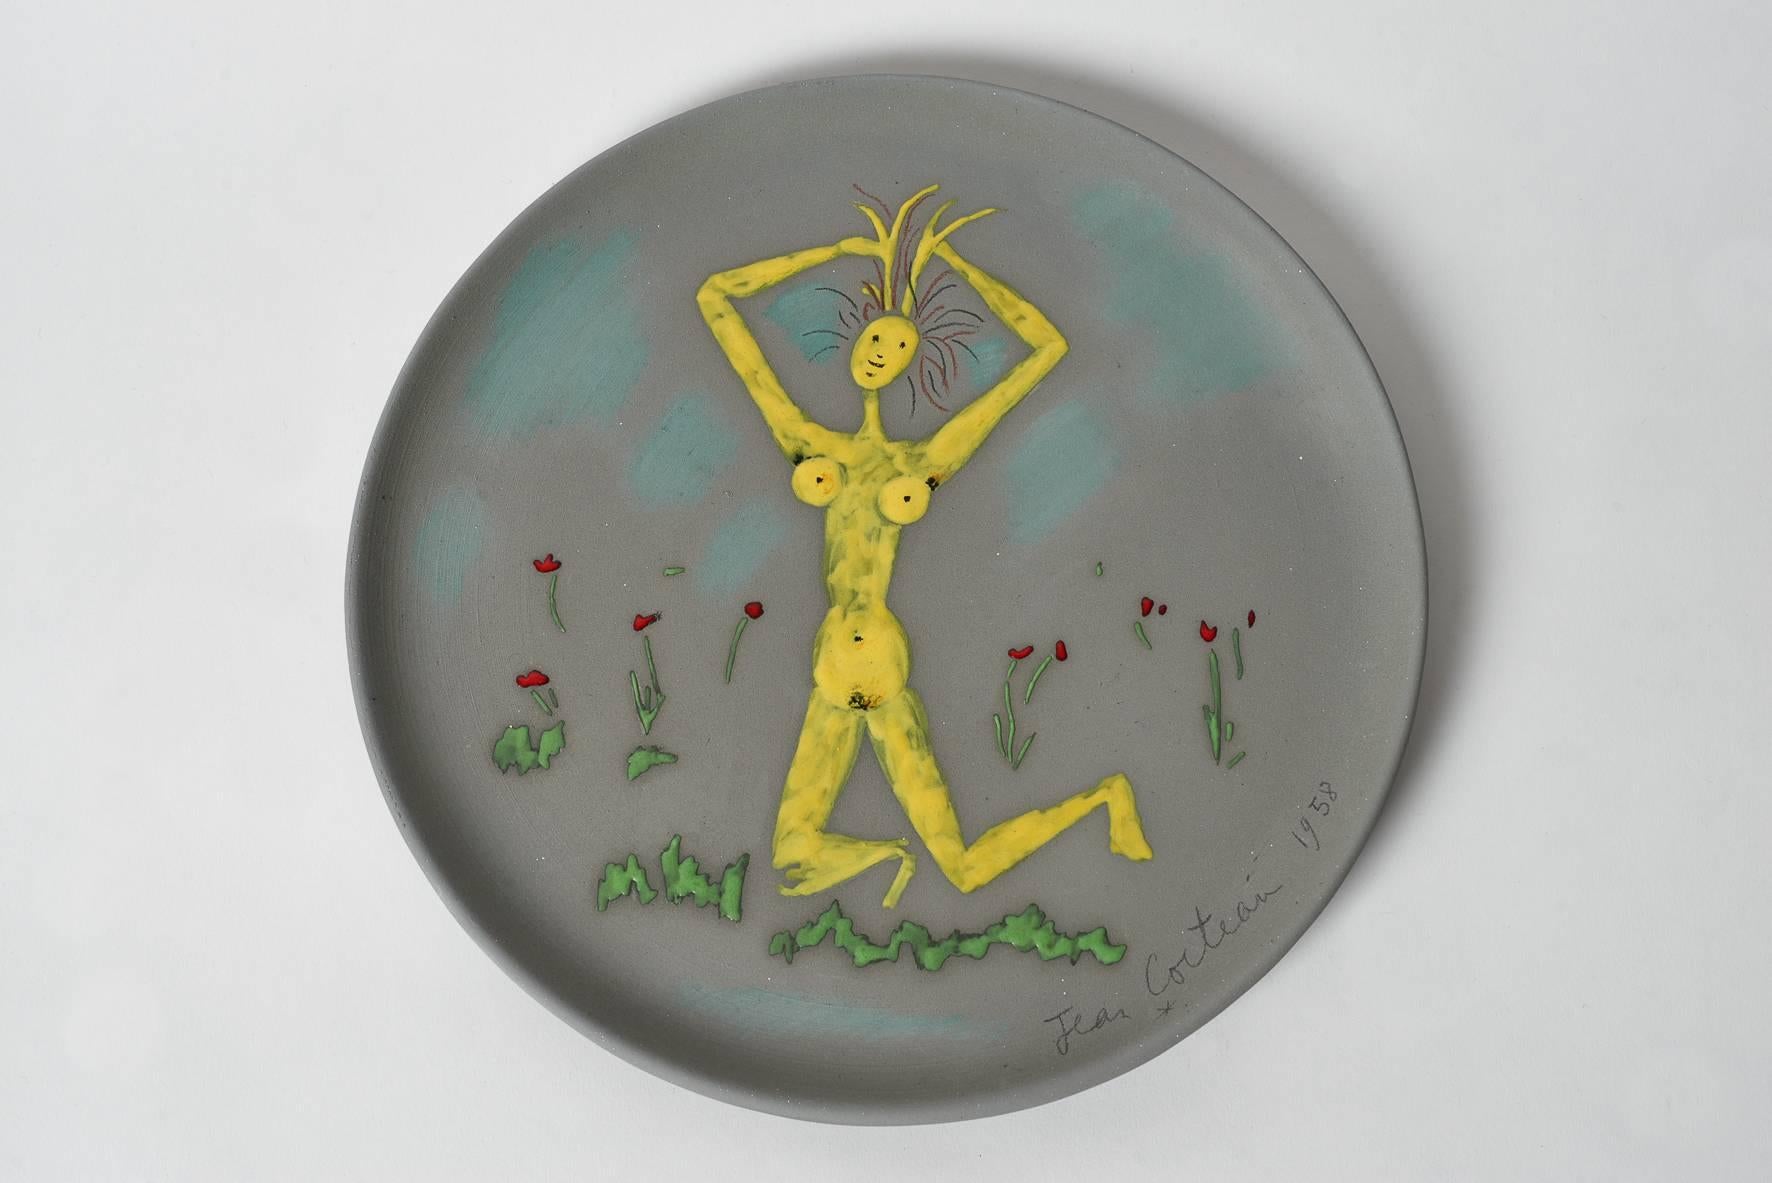 Jean Cocteau ceramic dish - Femme se coiffant, 1958

Edition originale Madeline Jolly with certificat d'origine dated and signed from 1958.

White earthenware with grey ceramic engobe and shiny yellow enamel woman. Measures: Diameter 30